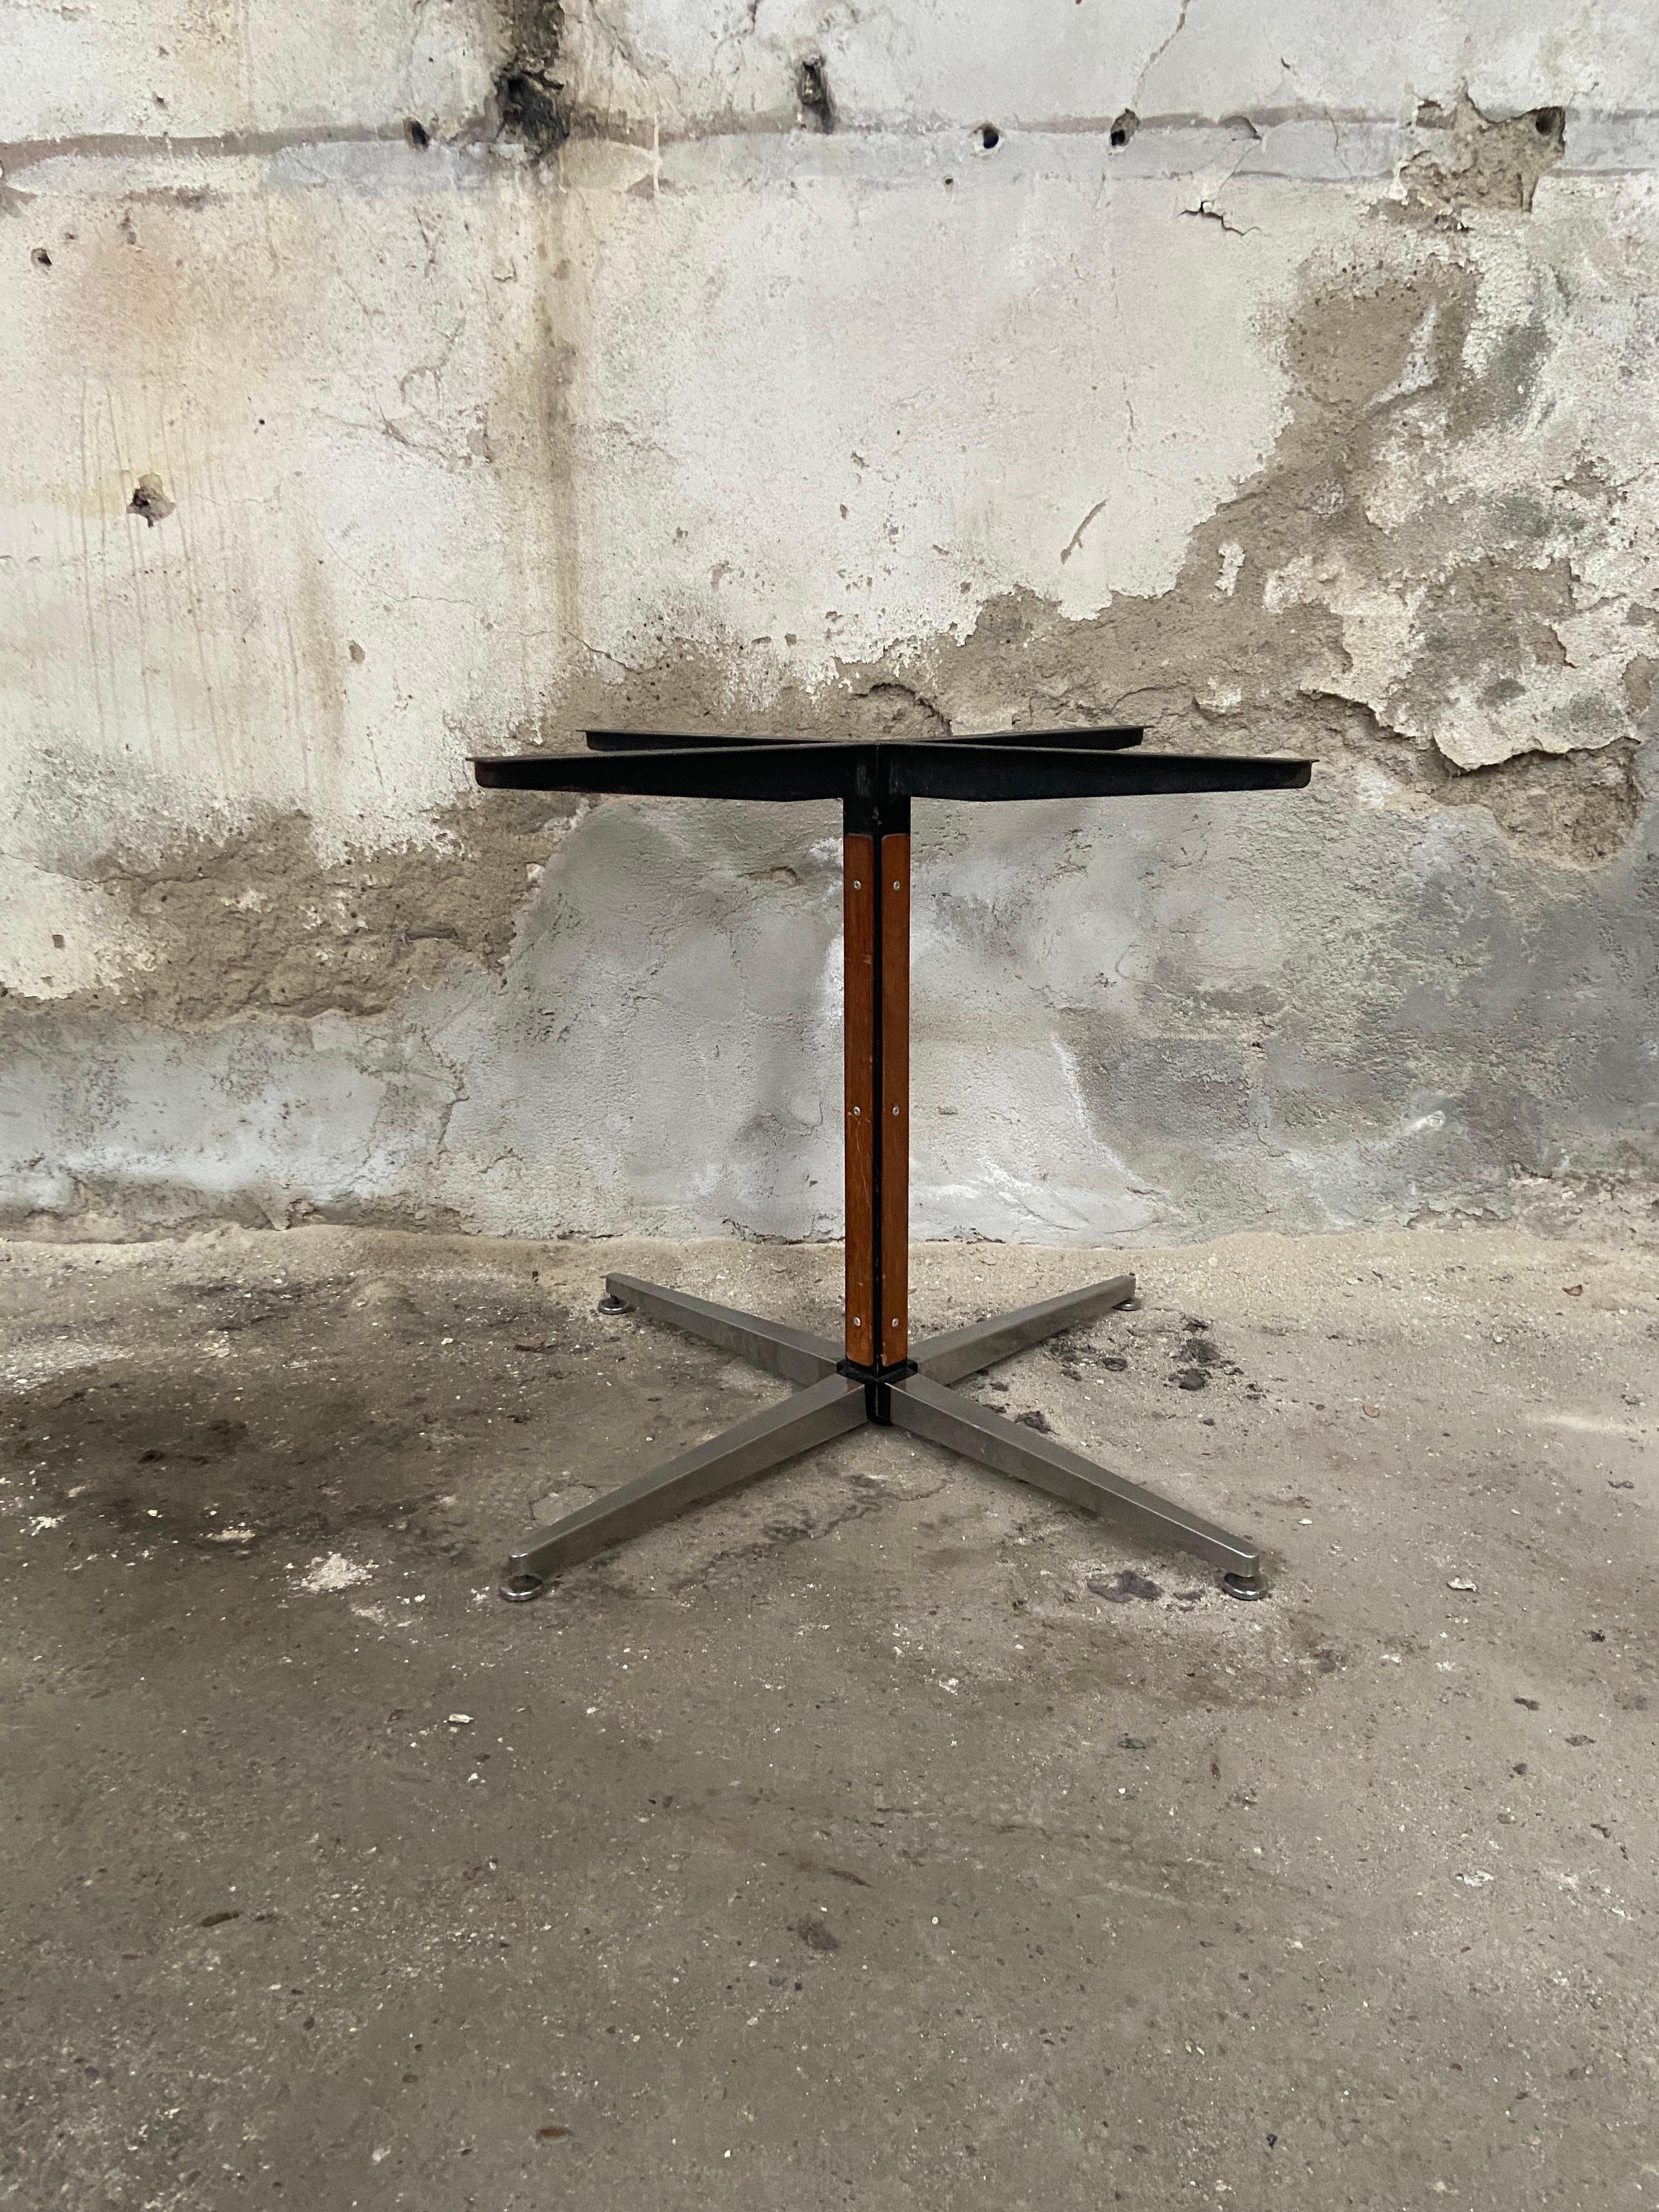 Mid-Century Modern Italian Iron Table Base with Tripode Aluminum Legs and wooden inserts. 1970s
More pieces available.